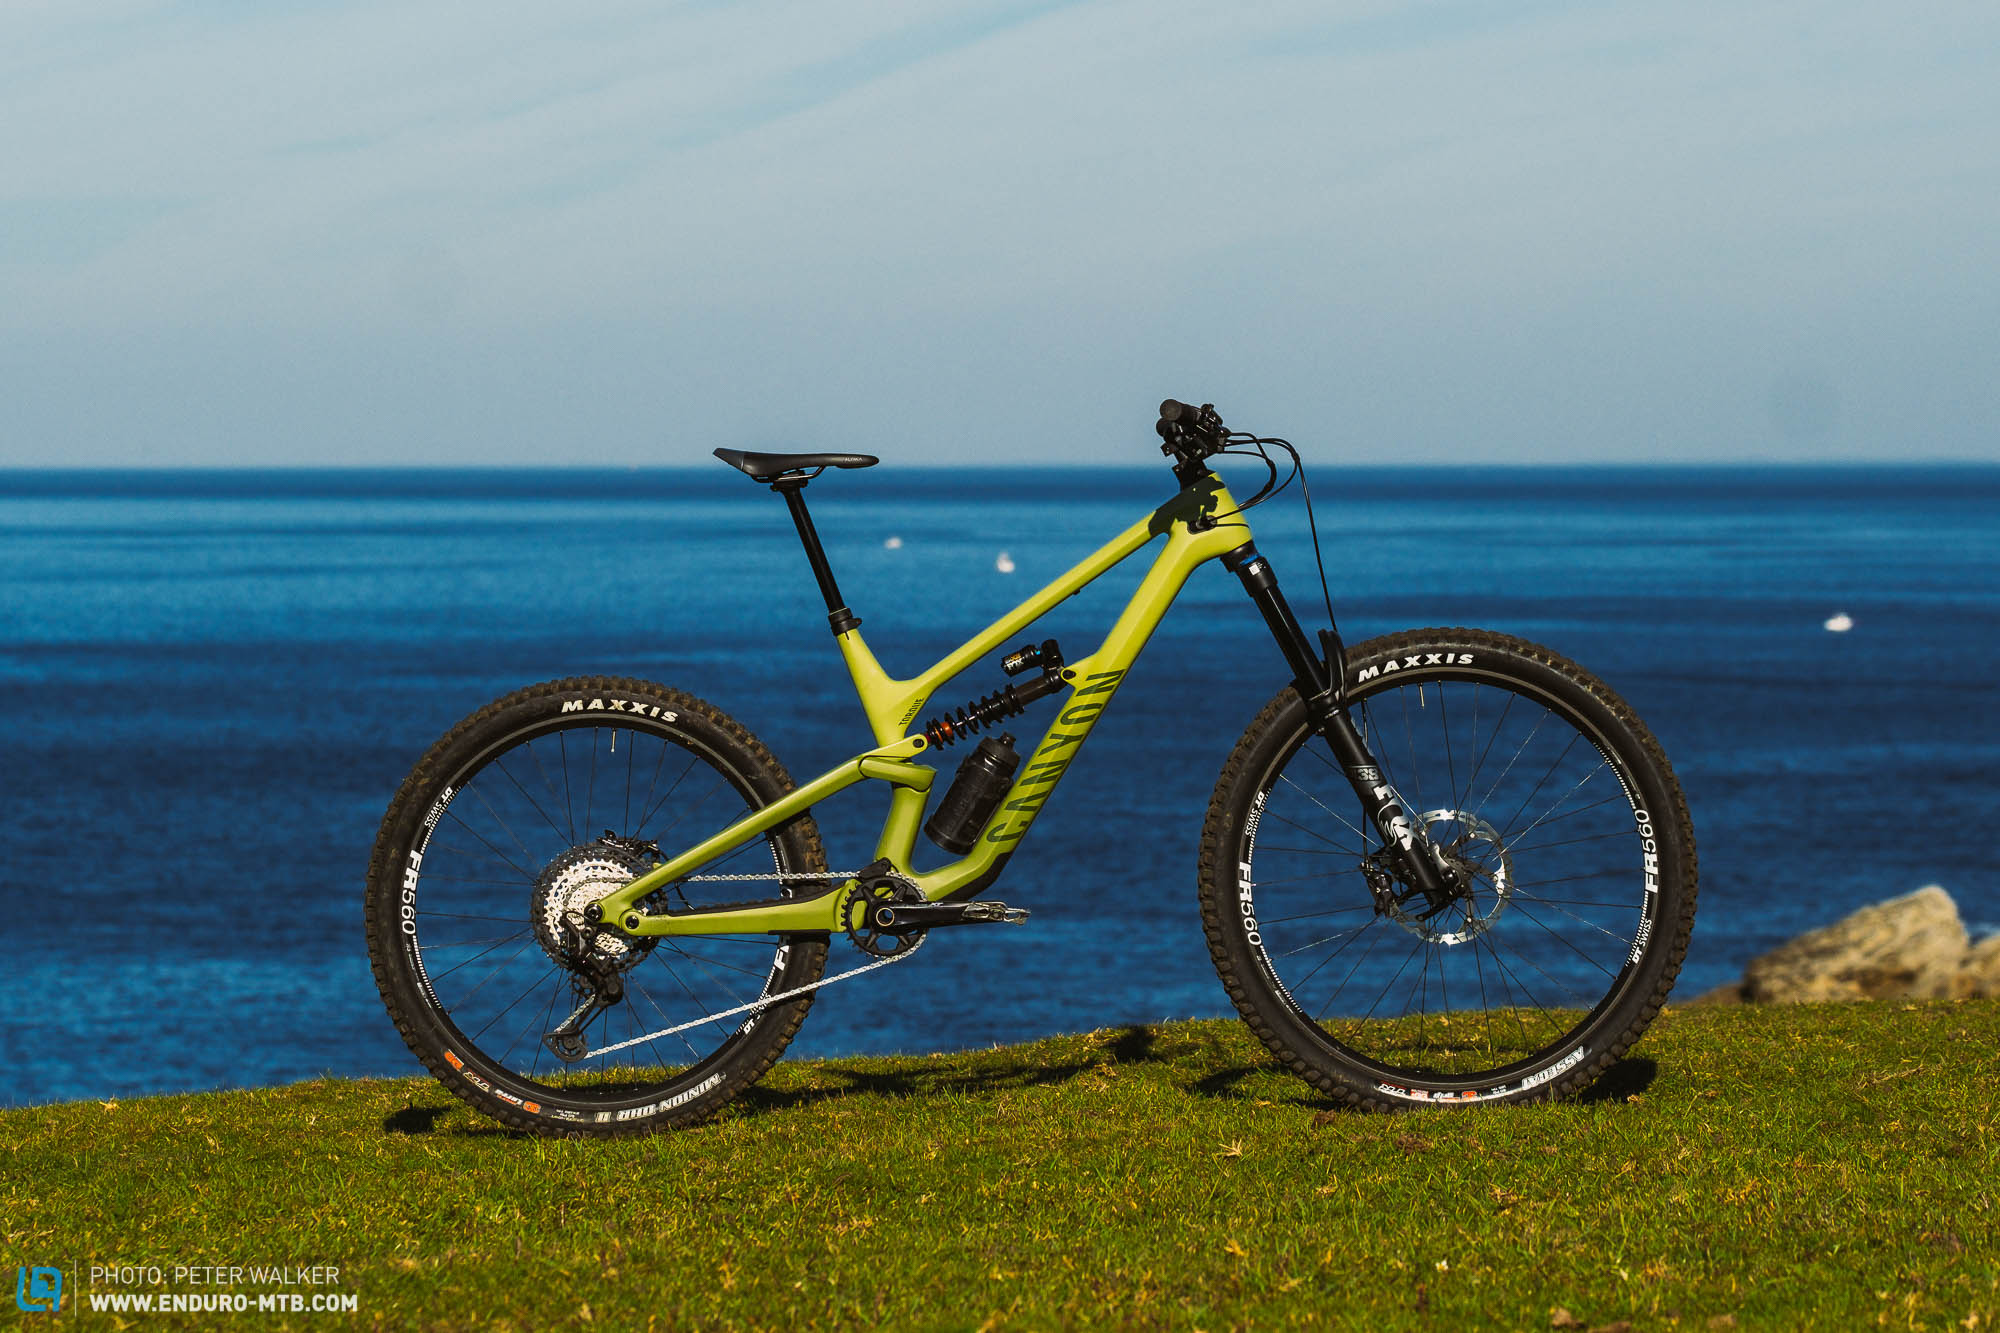 2022 Canyon Torque CF 8 first ride review – How does the new gravity bike ride?